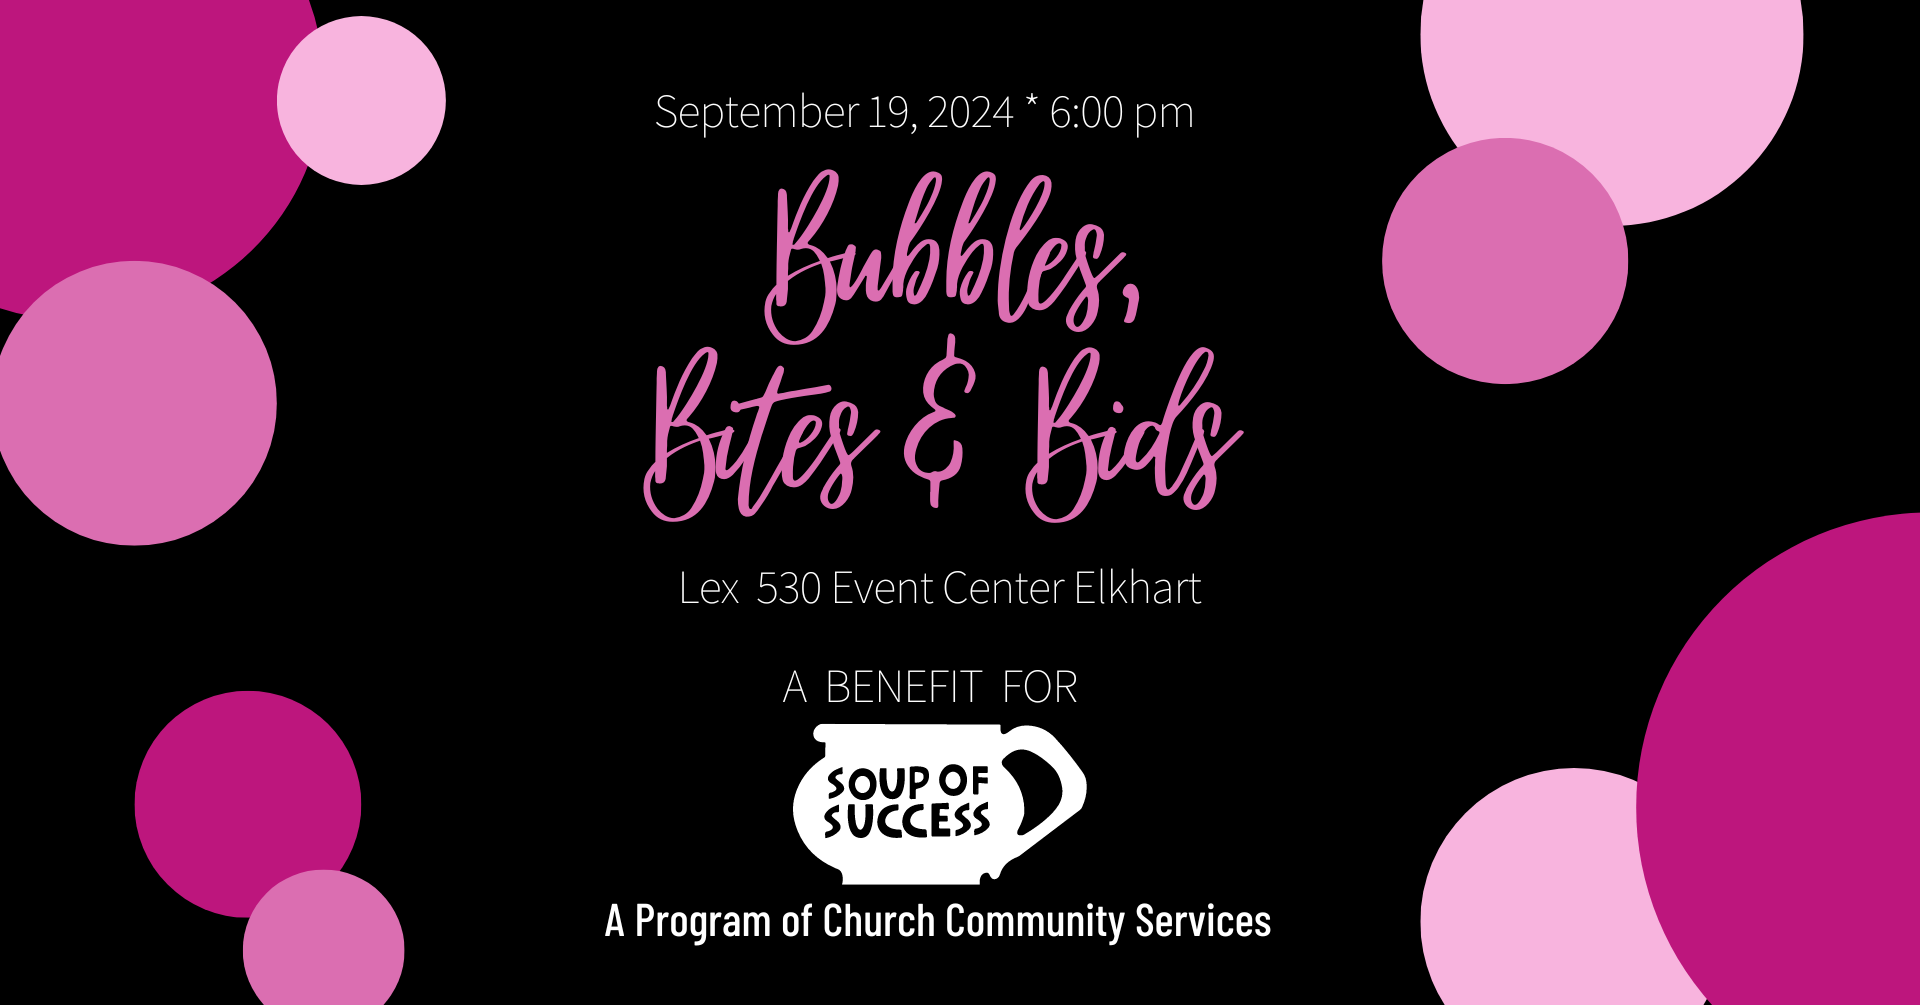 A graphic announcing the 2024 Bubbles, Bites, and Bids fundraiser event for Soup of Success.